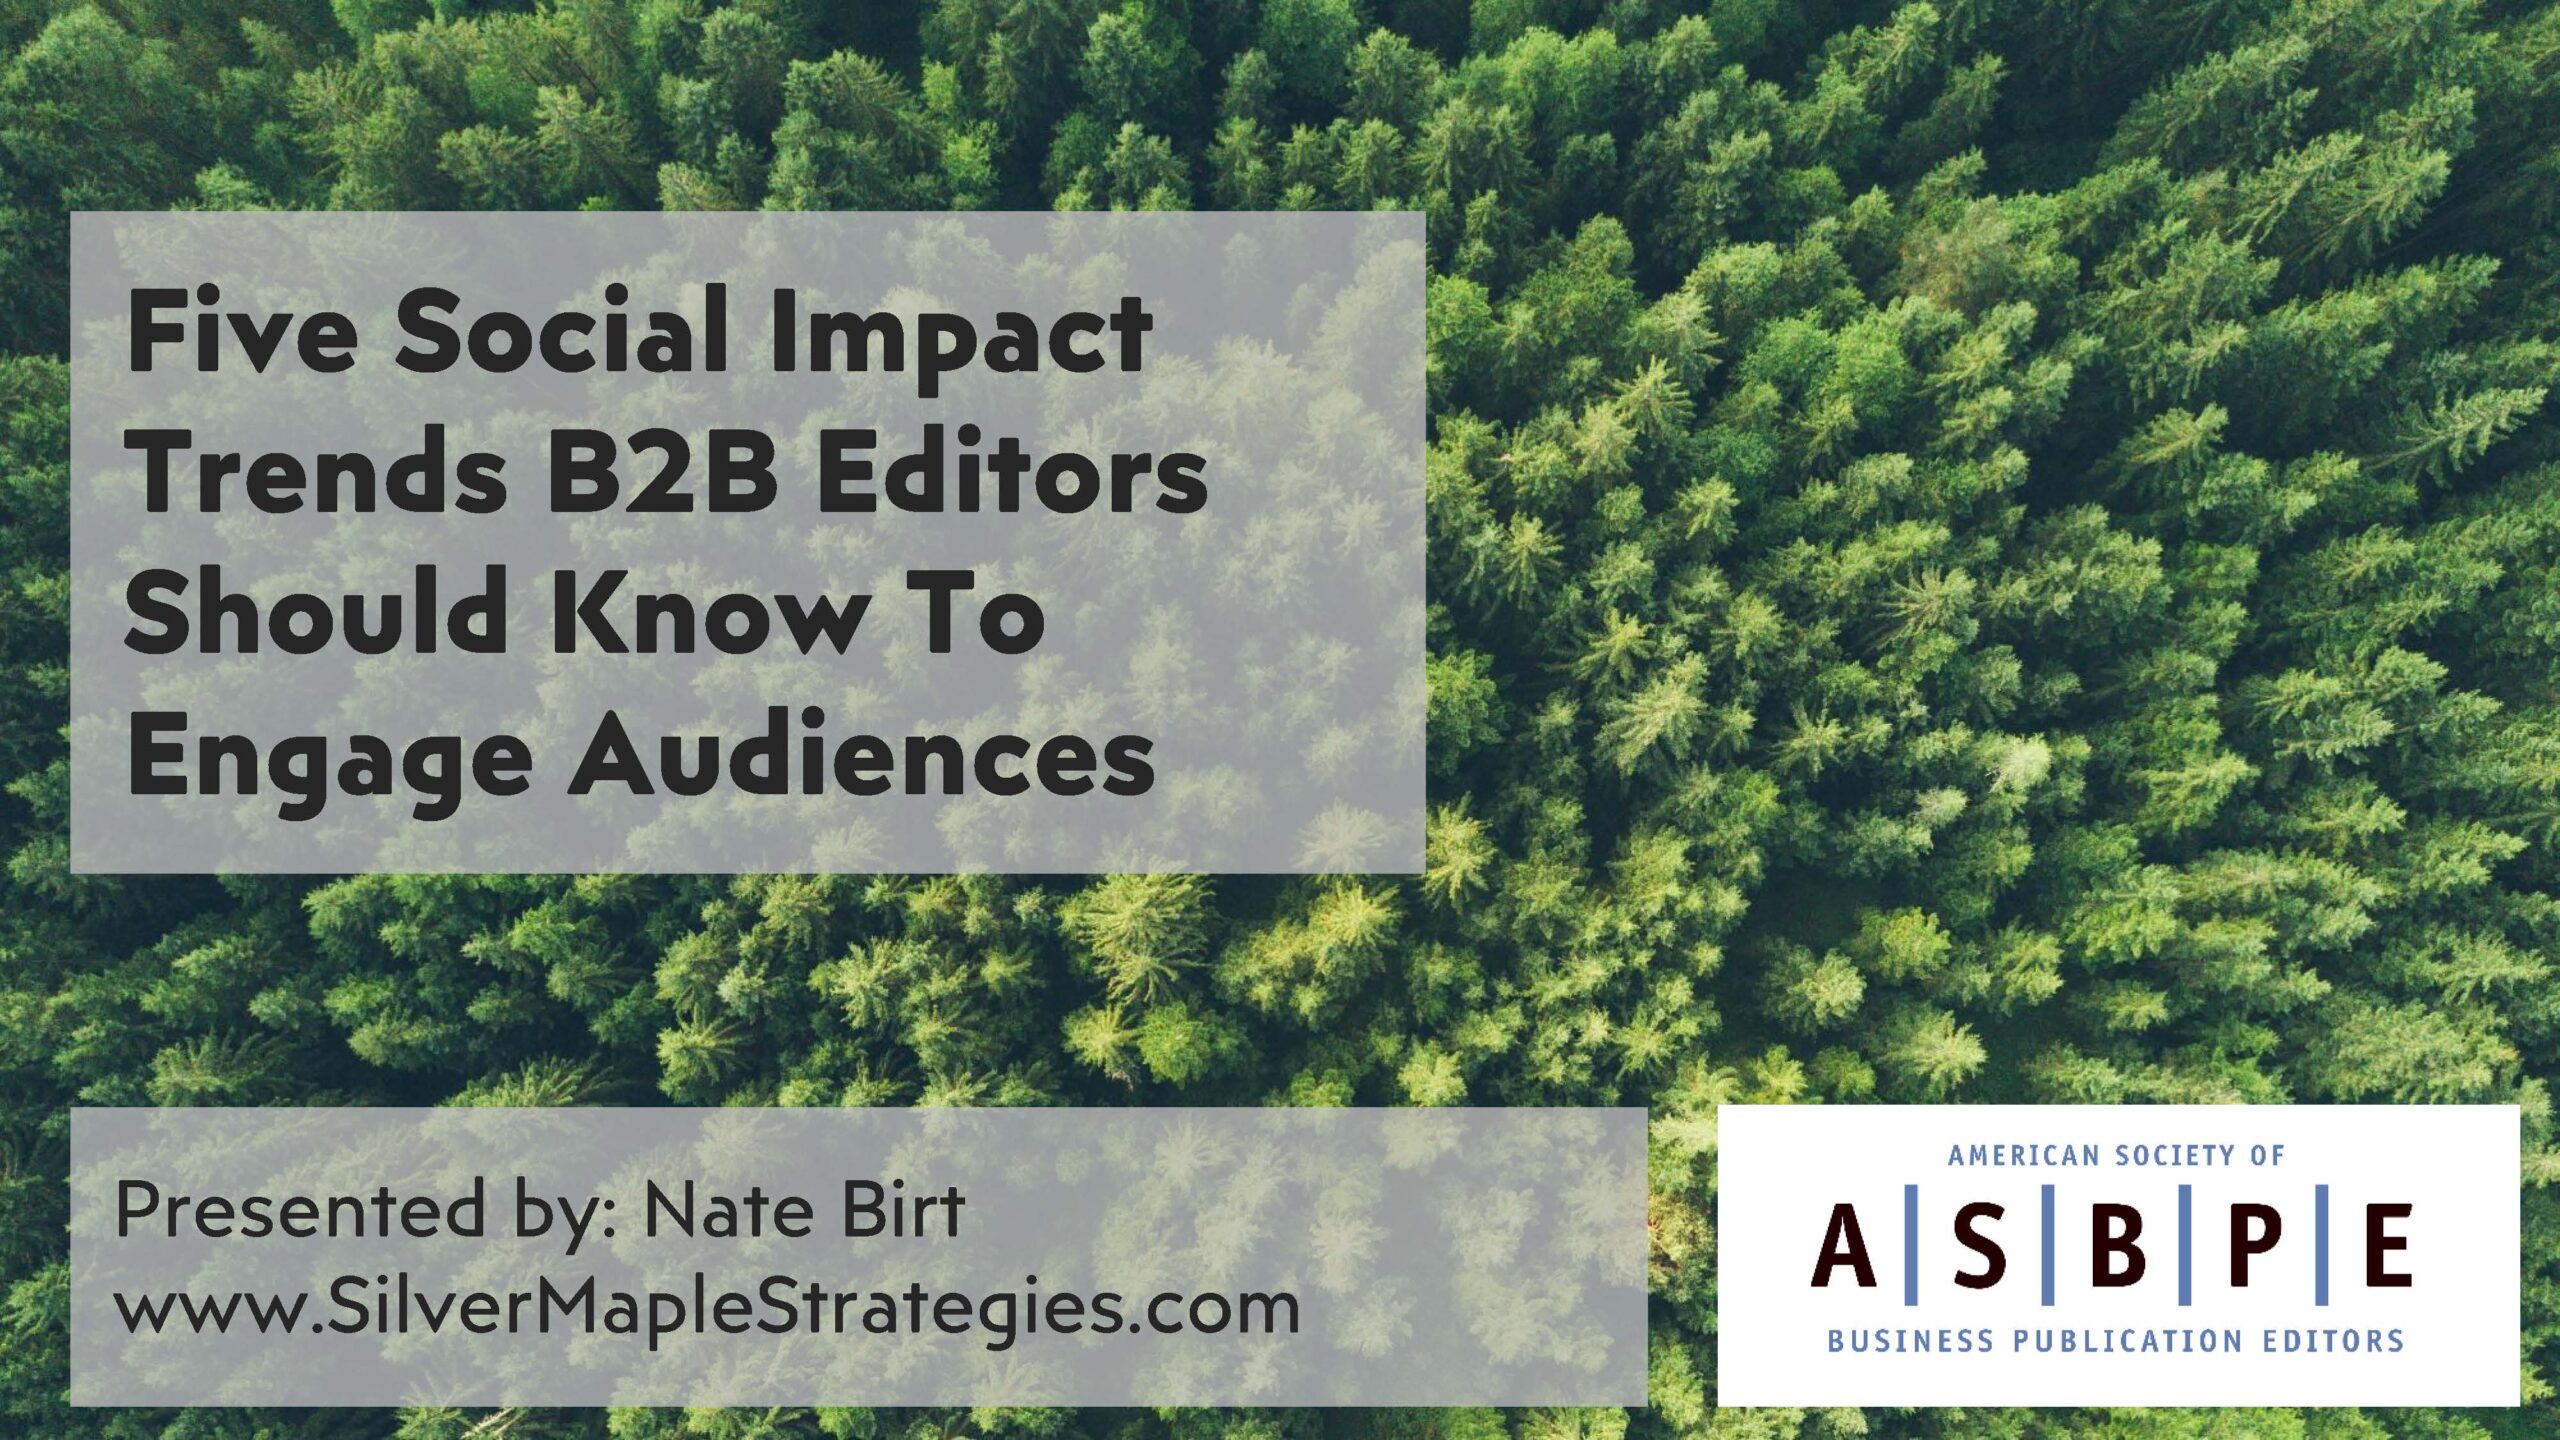 Five Social Impact Trends B2B Editors Should Know to Engage Audiences